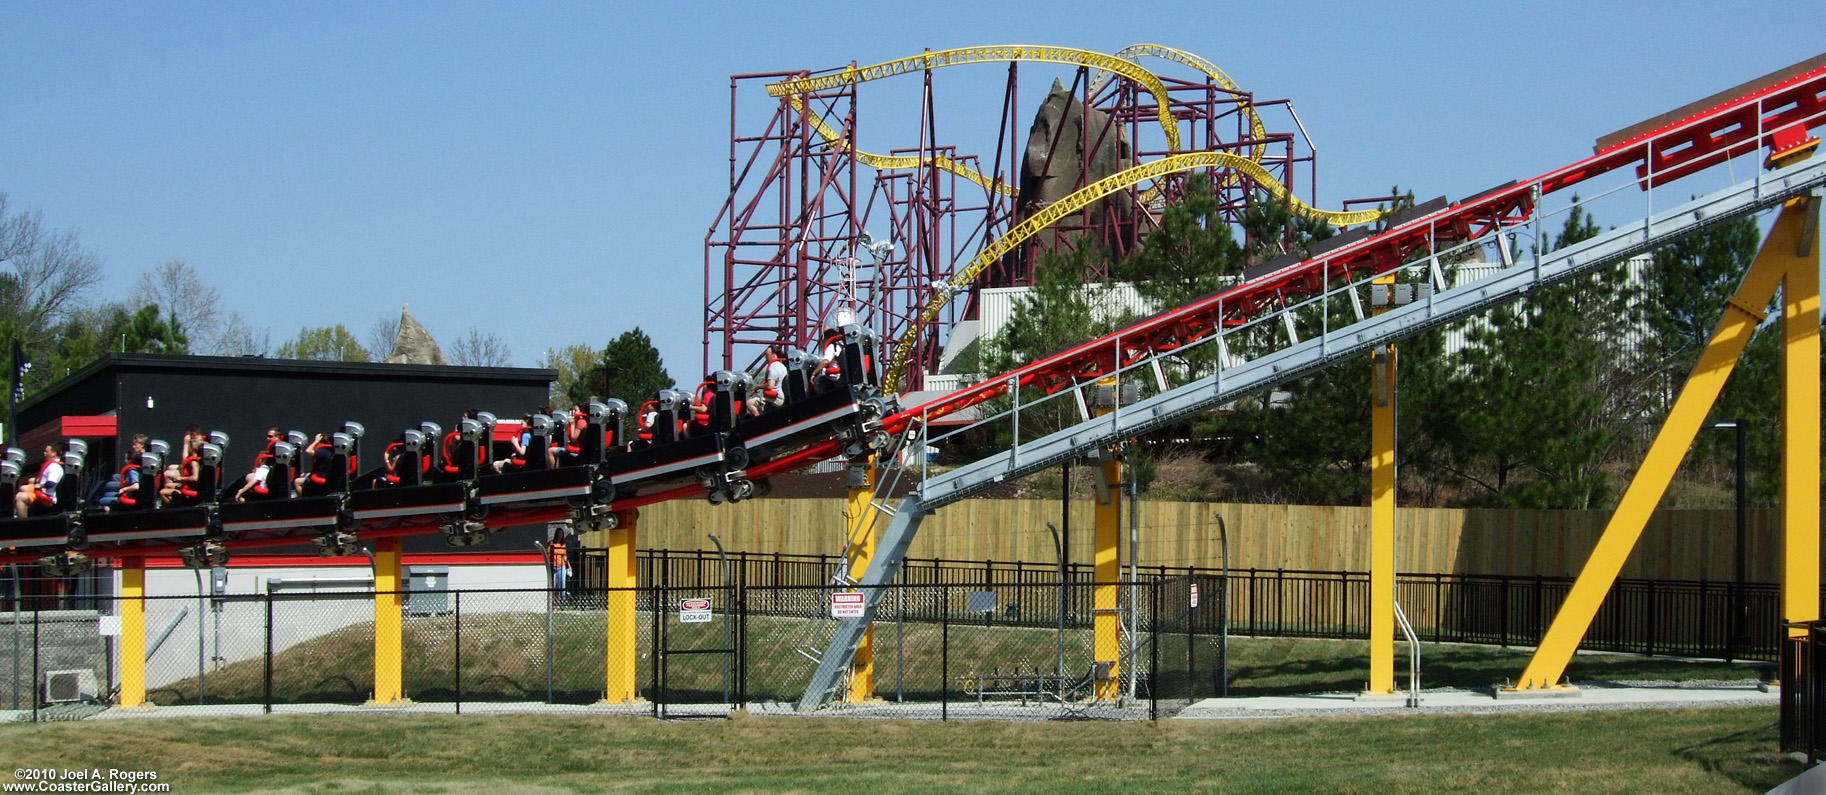 Intimidator and Volcano roller coasters - A NASCAR coaster near the Richmond International Speedway